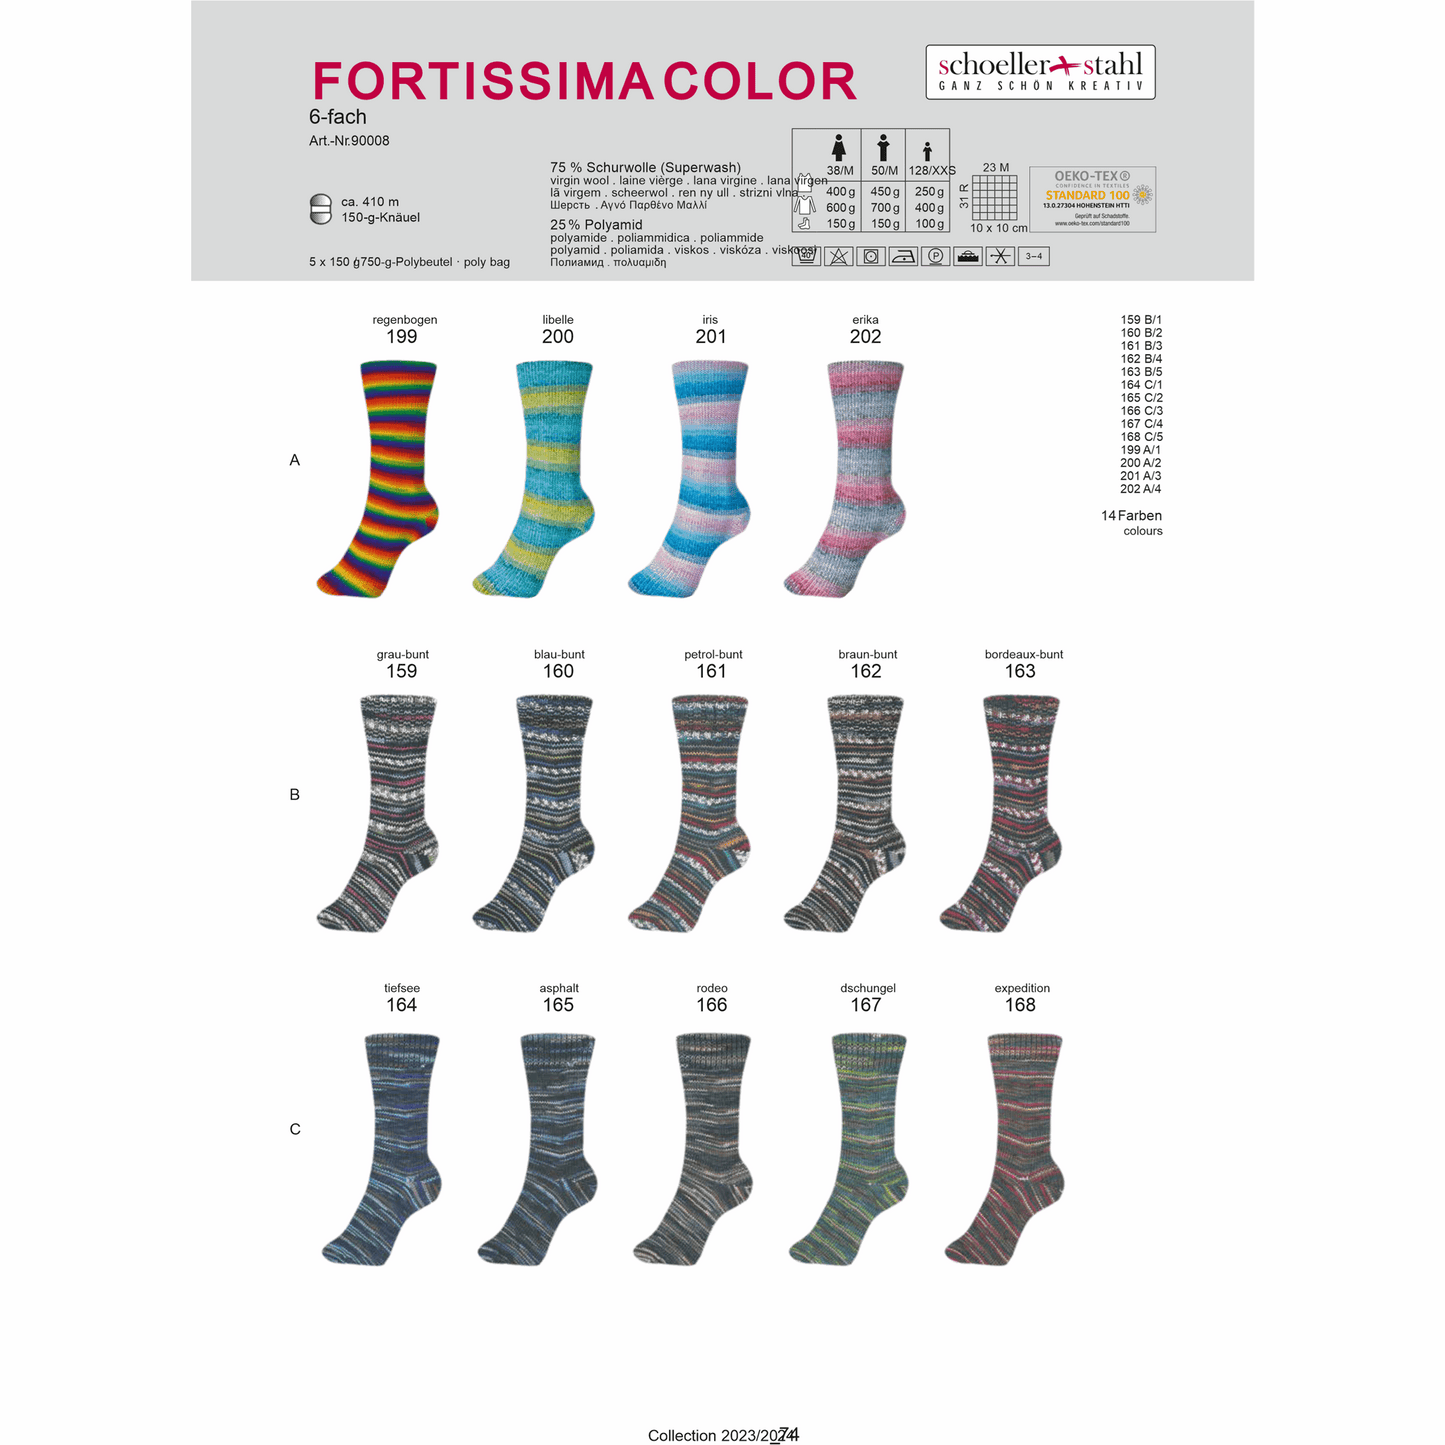 Fortissima 6-thread 150g color, 90008, color 199, rainbow